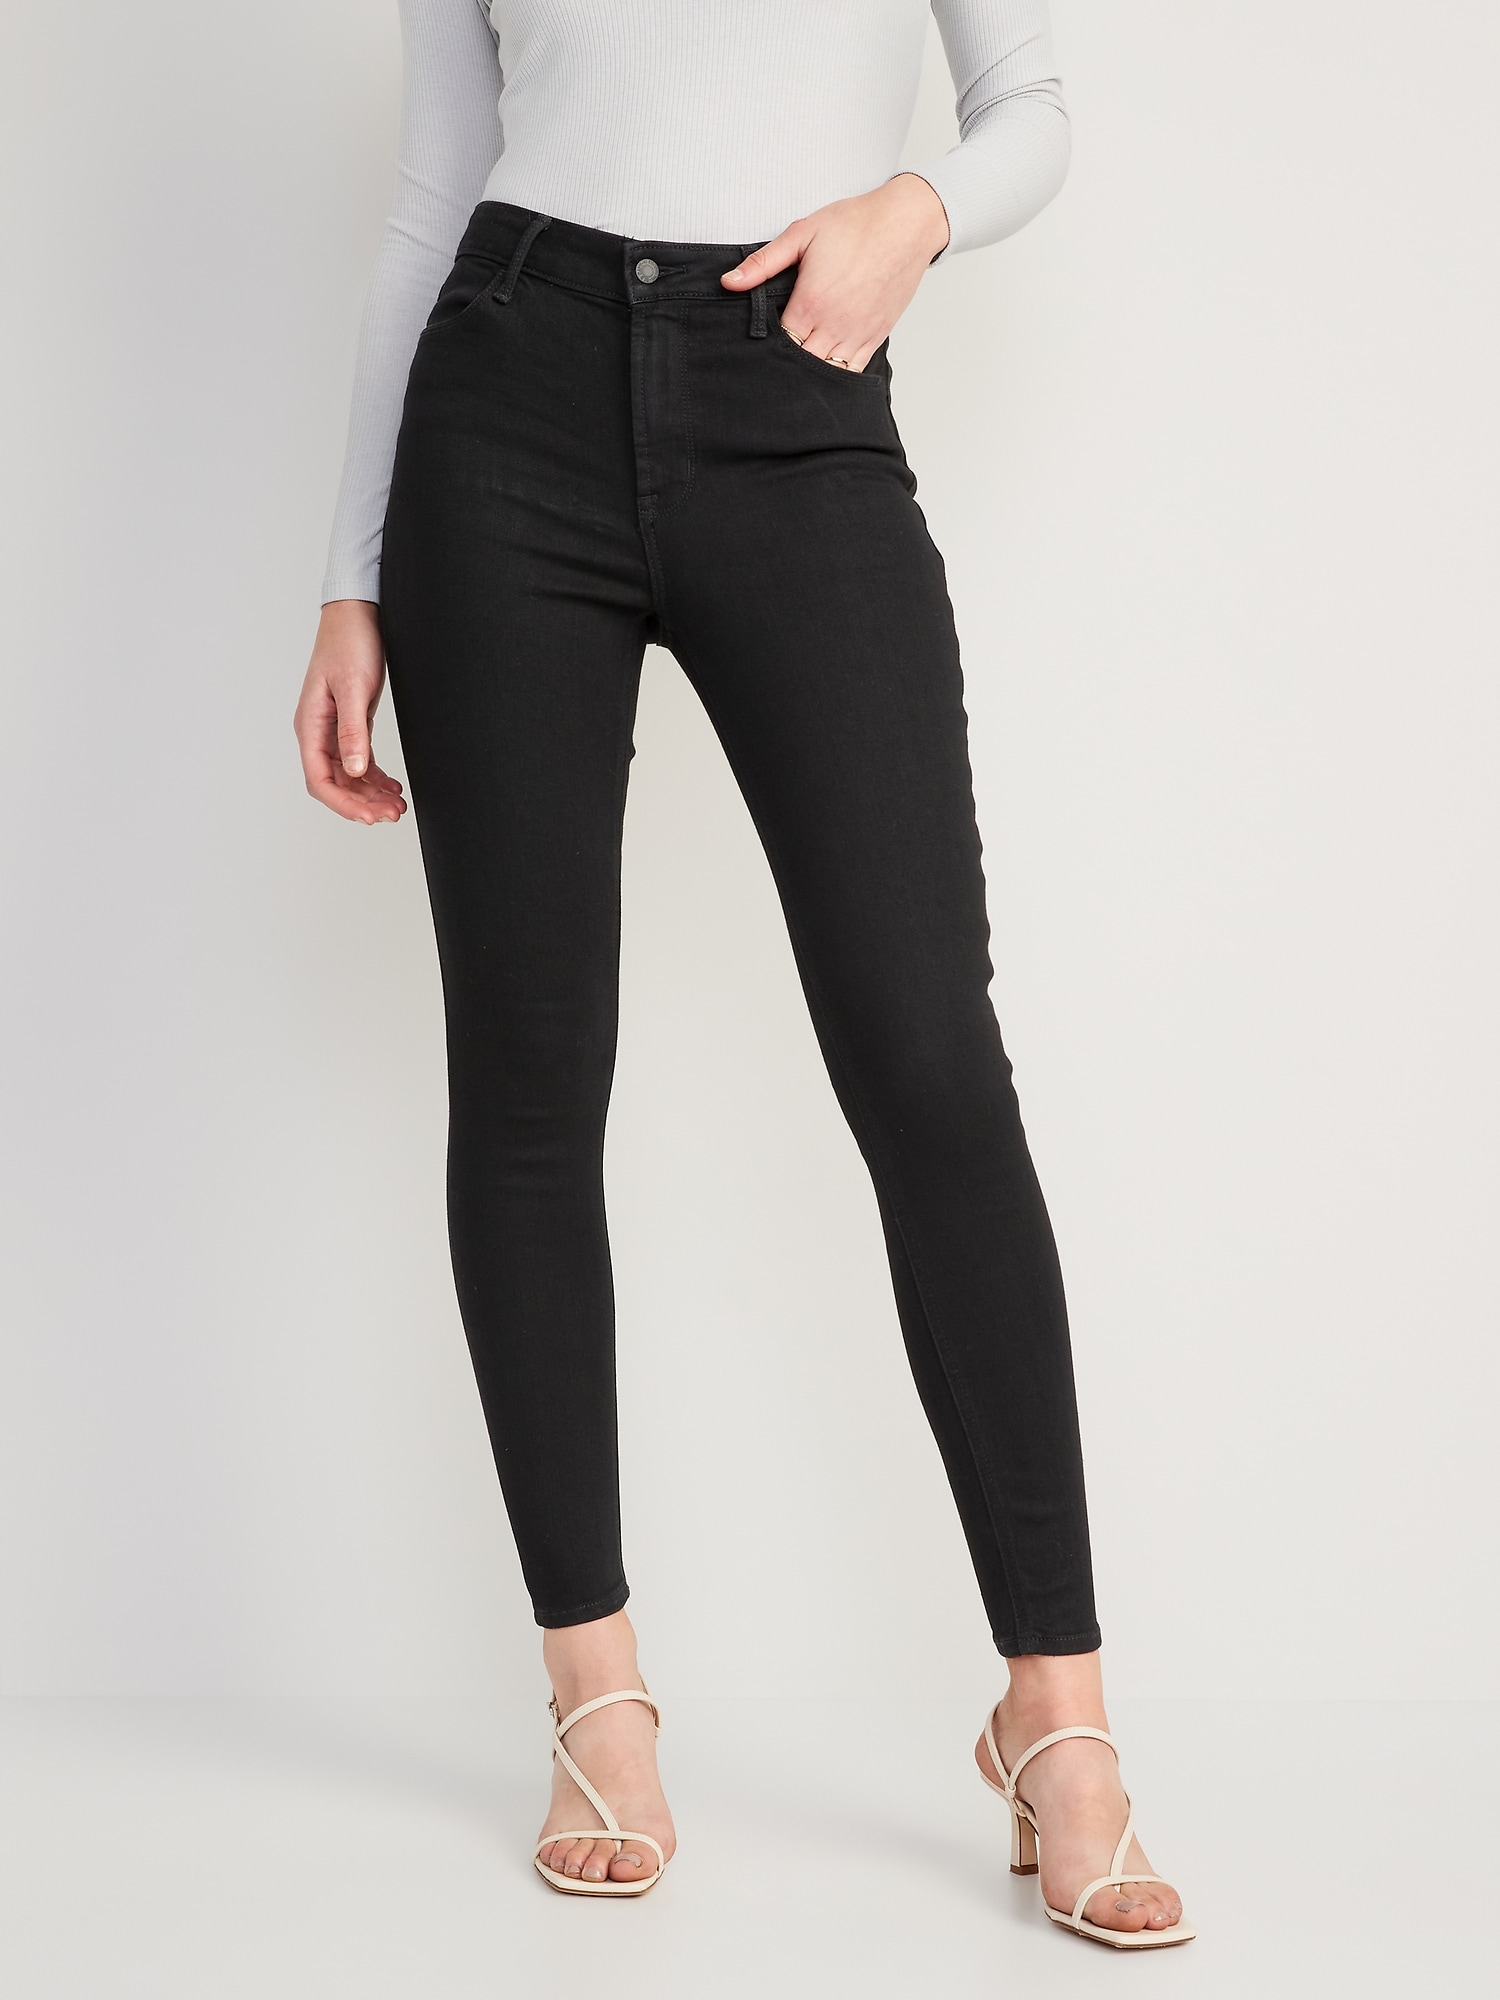 Cuadrante Implacable yermo High-Waisted Wow Super-Skinny Black Jeans for Women | Old Navy